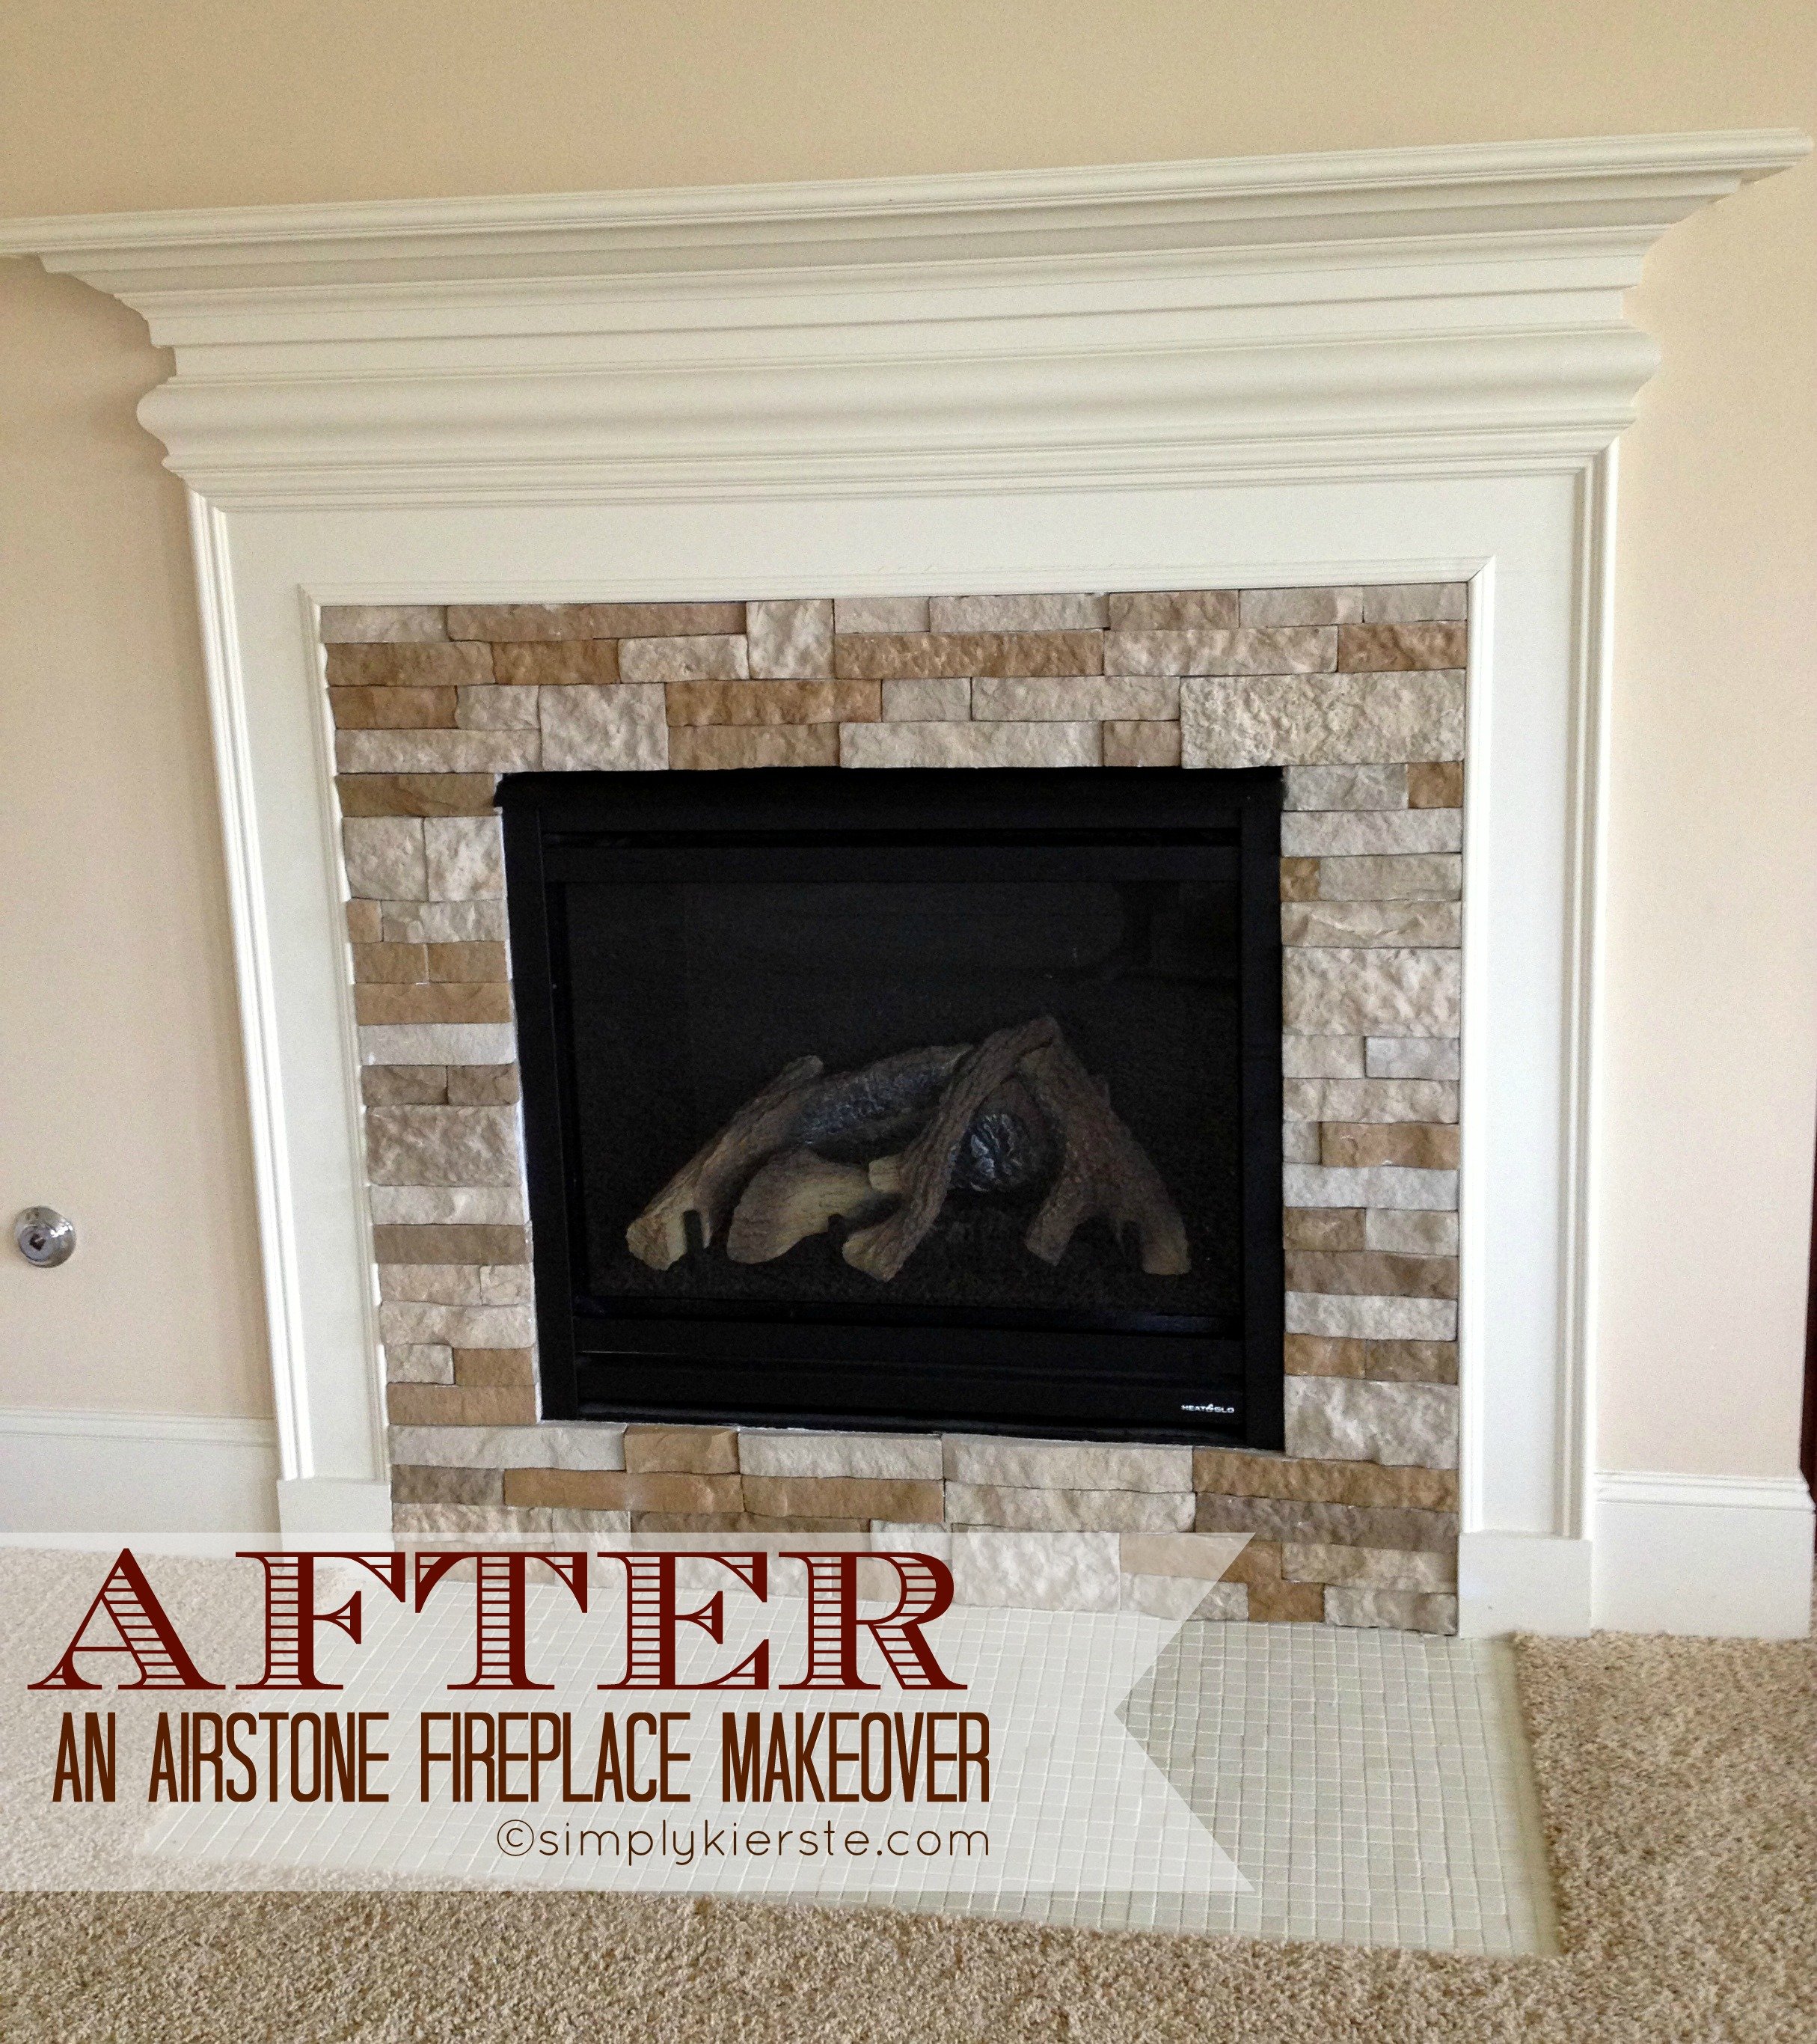 A fireplace makeover before and after